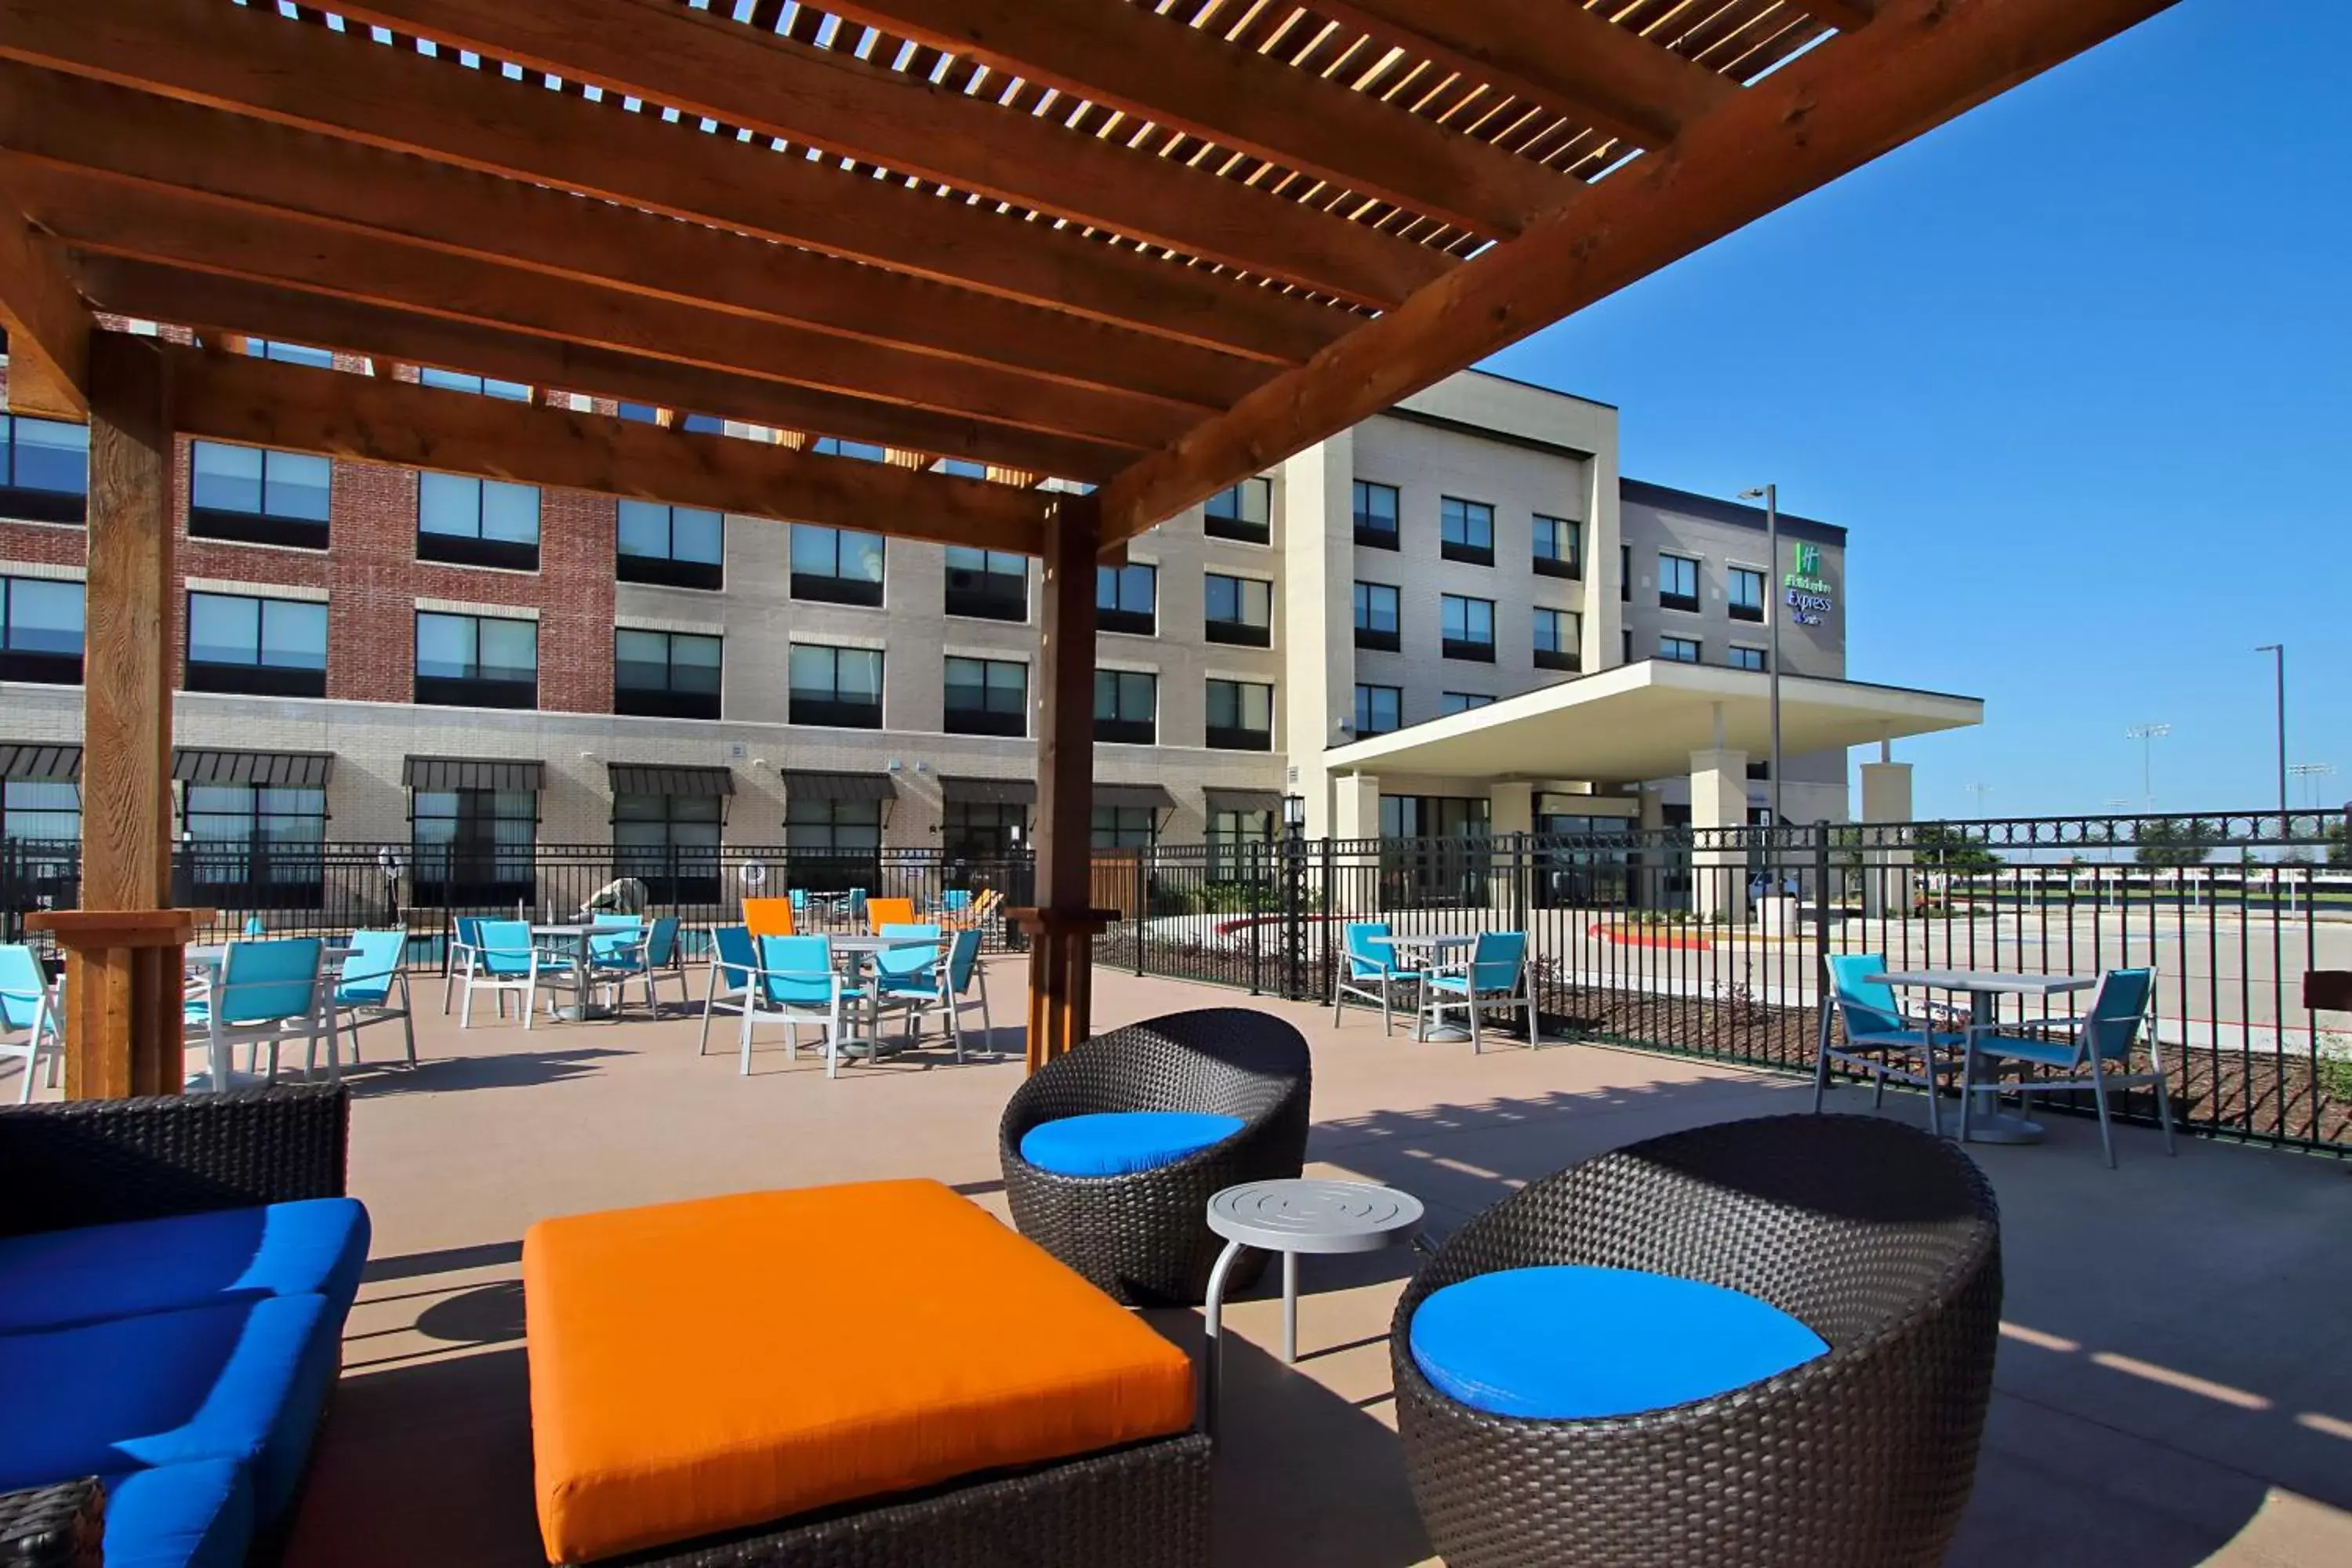 Property building in Holiday Inn Express & Suites - Frisco NW Toyota Stdm, an IHG Hotel